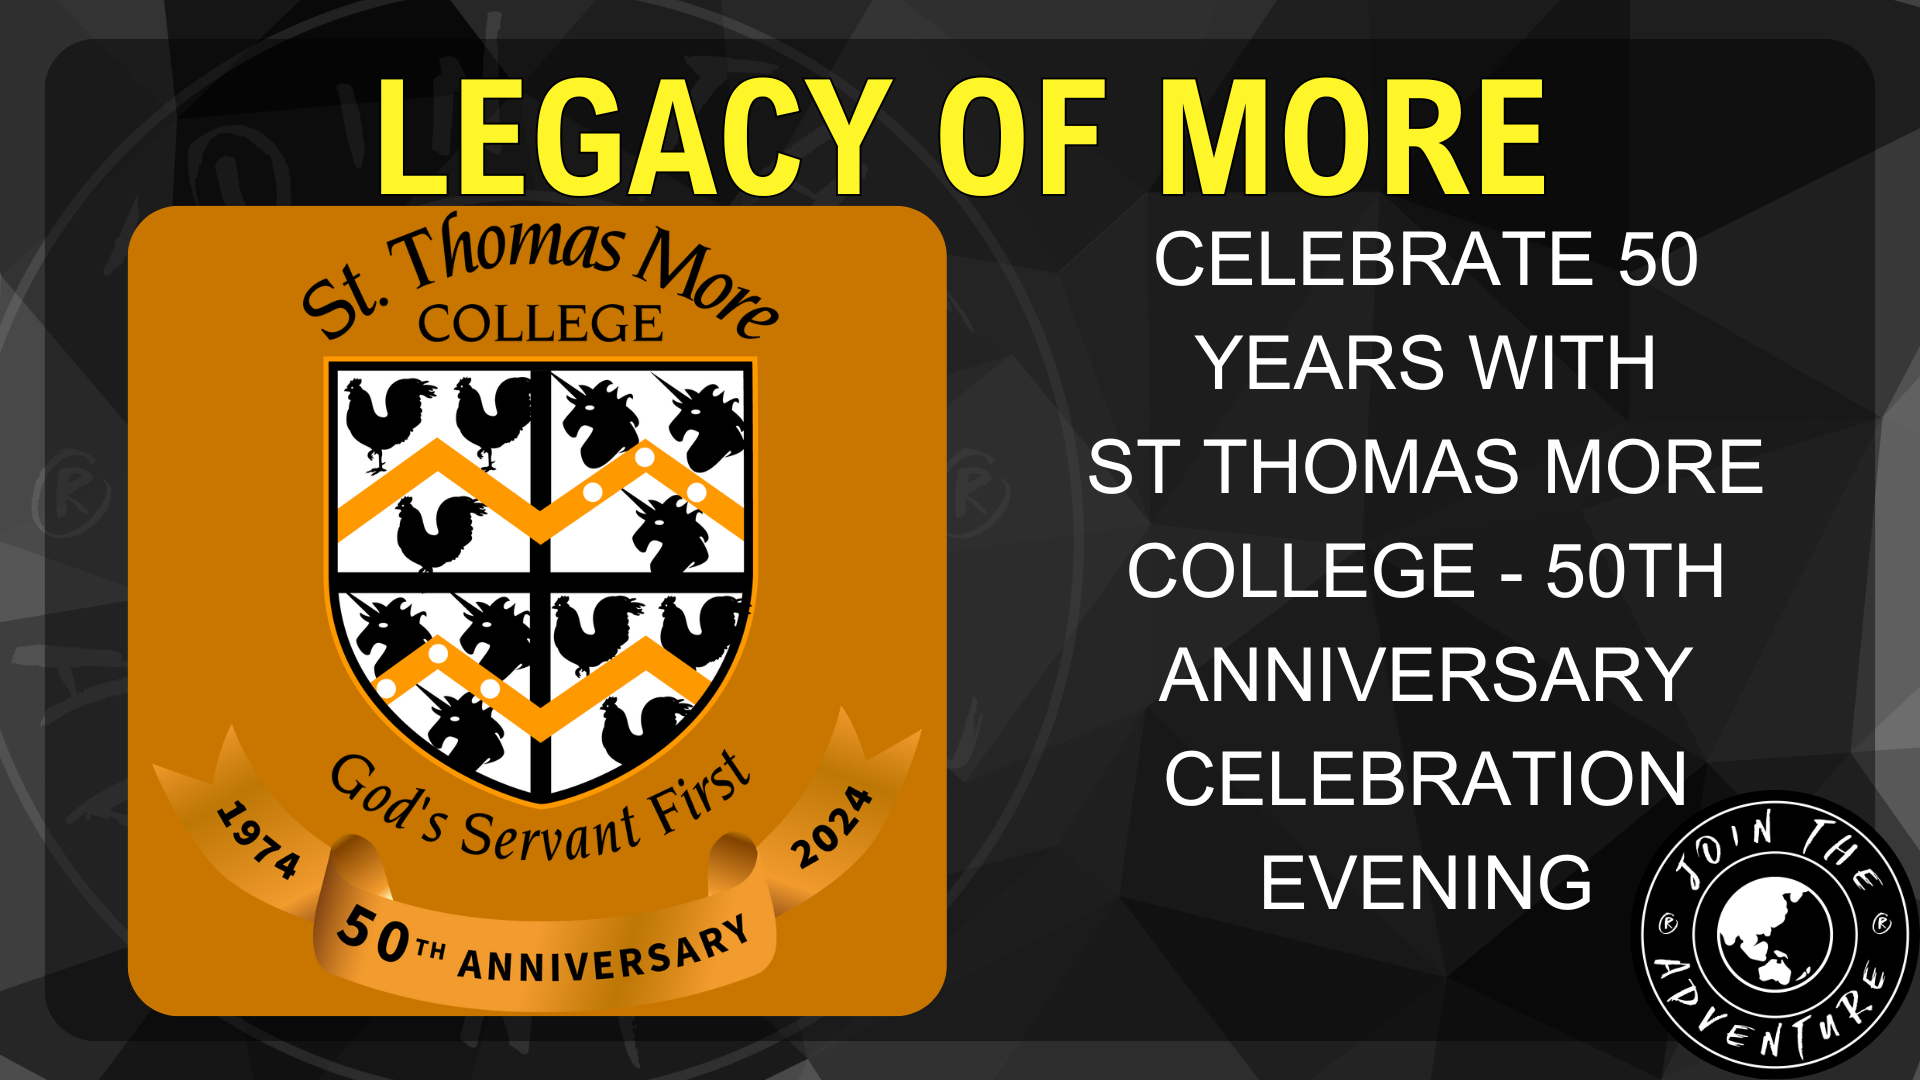 St Thomas More College Marks 50 Years with Grand Anniversary Celebration